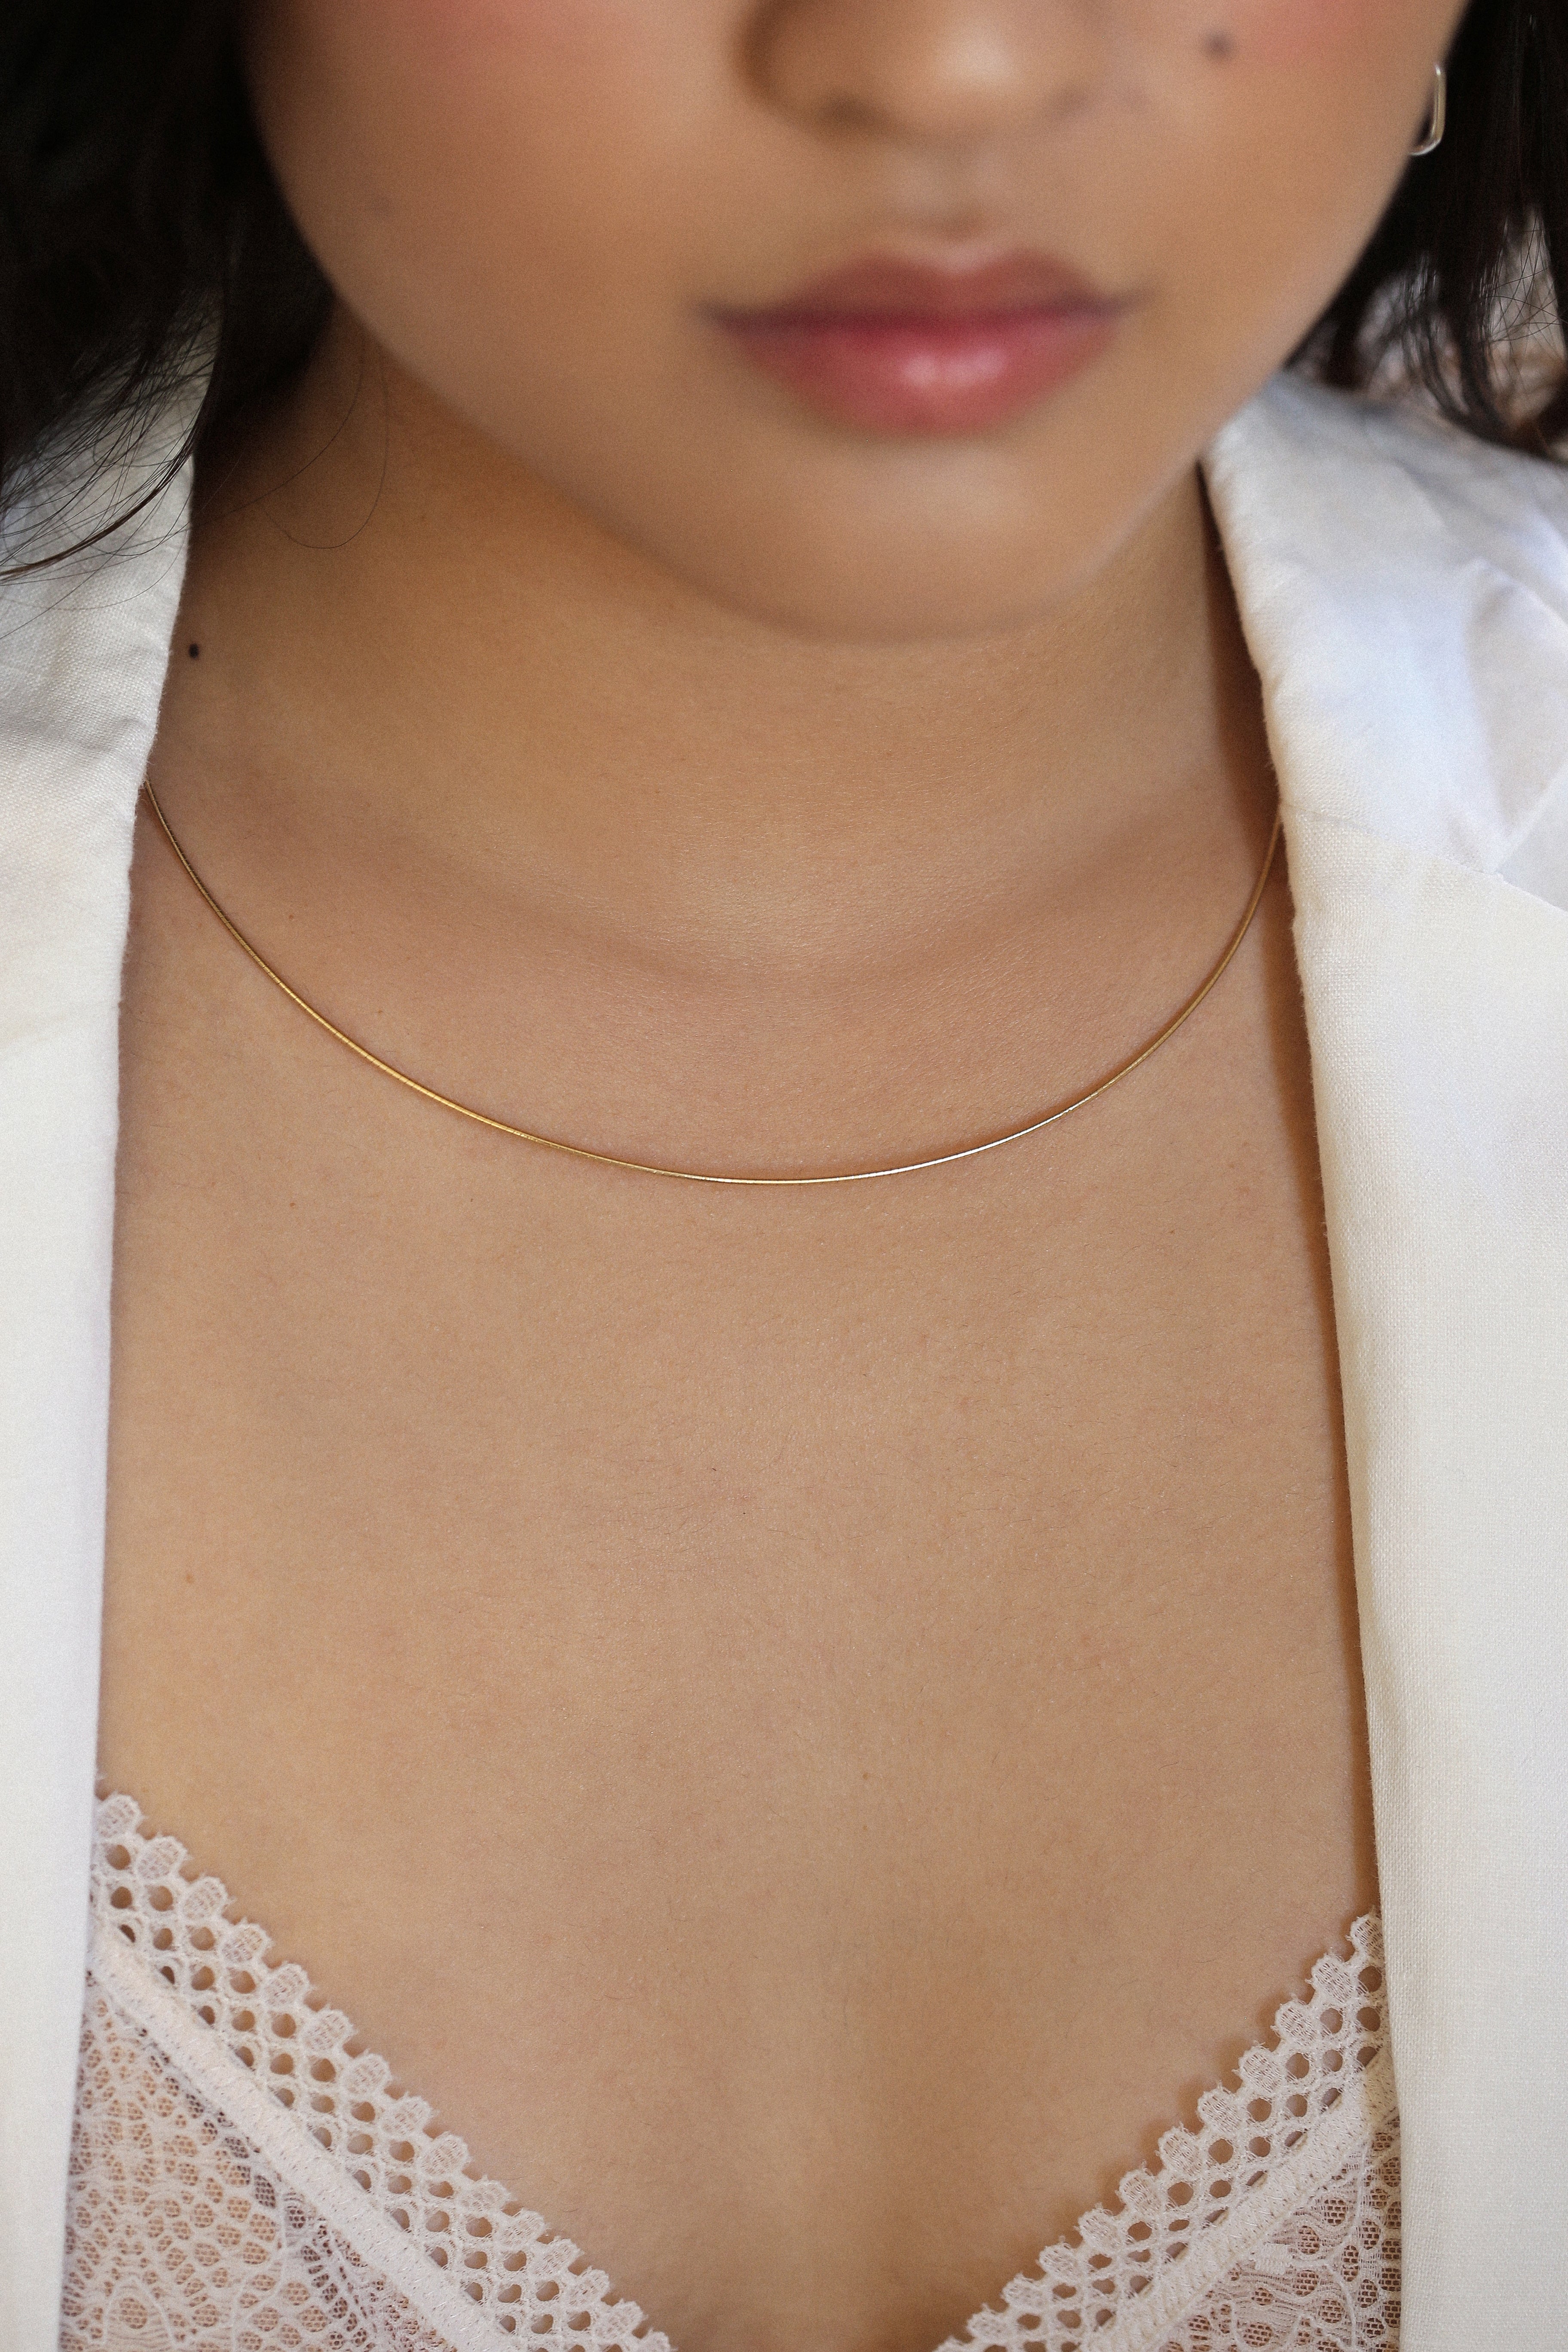 Thin Yellow Gold Omega Chain Necklace